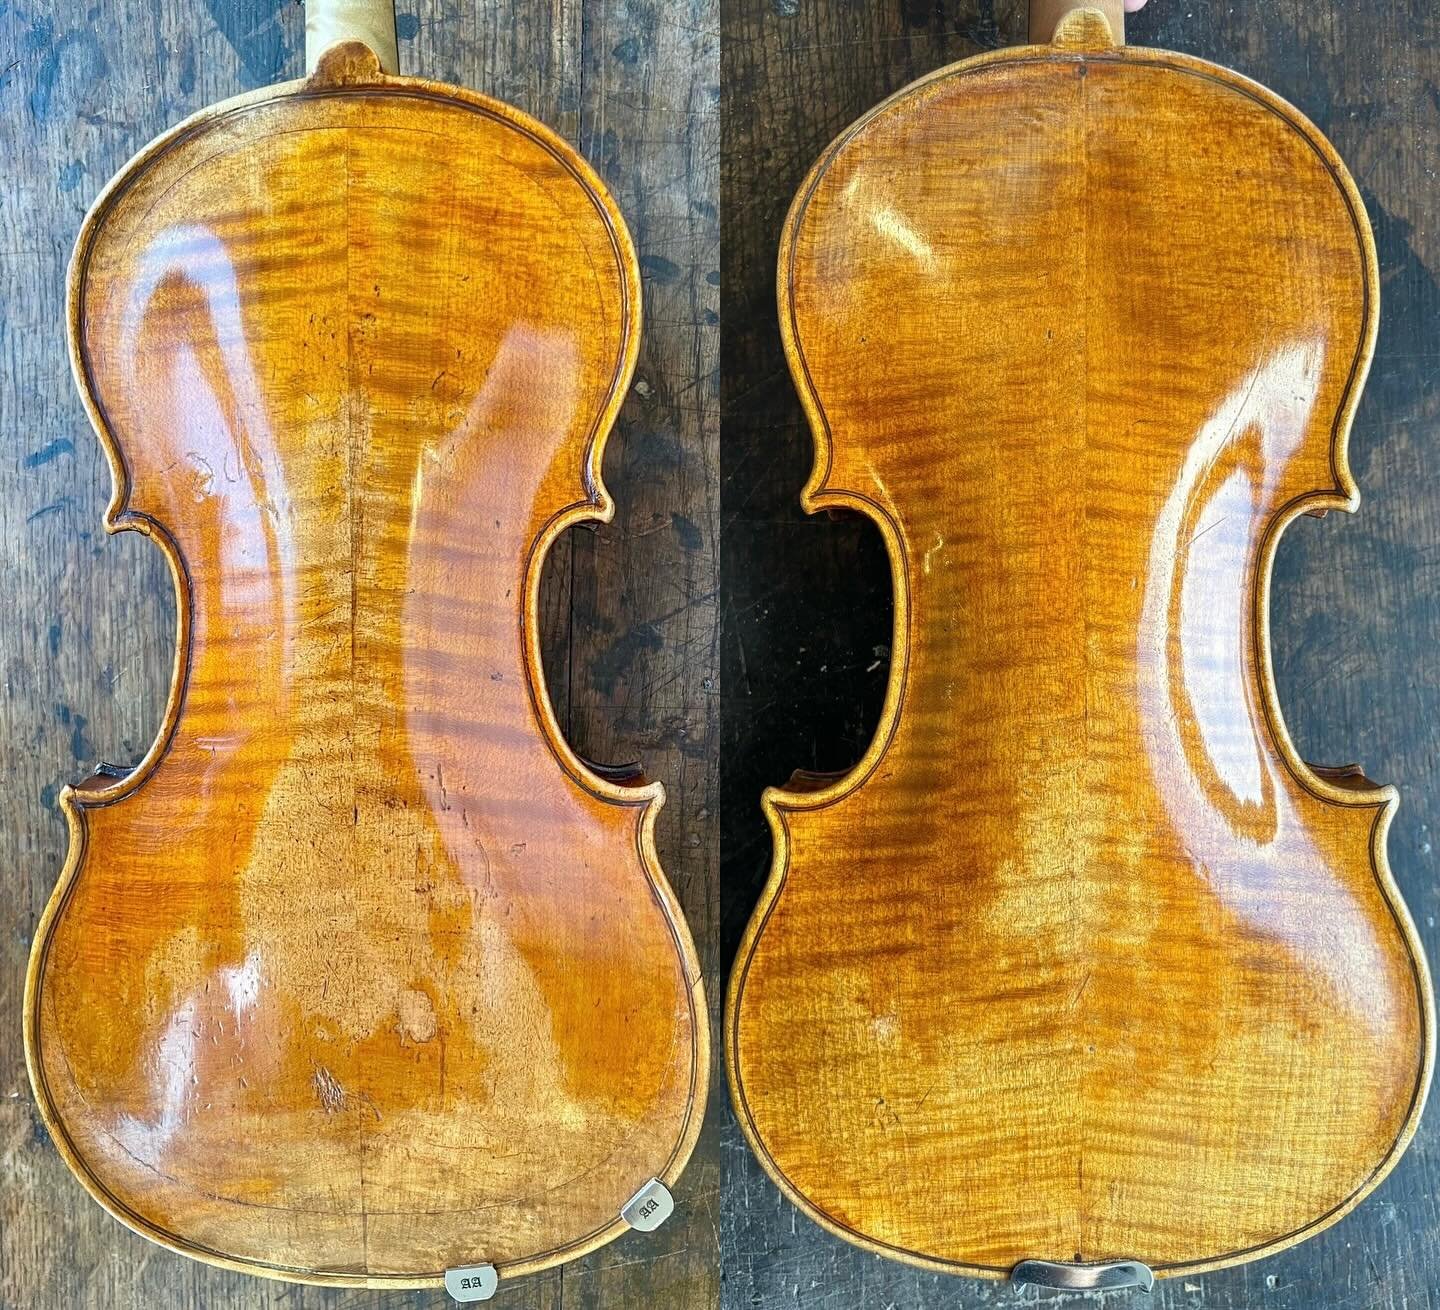 Fratelli riuniti&hellip;. Two violins by brothers Ferdinand &amp; Joseph Gagliano Napoli 1767 &amp; 1779, sons of Nicol&ograve; Gagliano.

Although Ferdinand most likely studied with his uncle Gennaro and Joseph with his father Nicol&ograve;, a clear